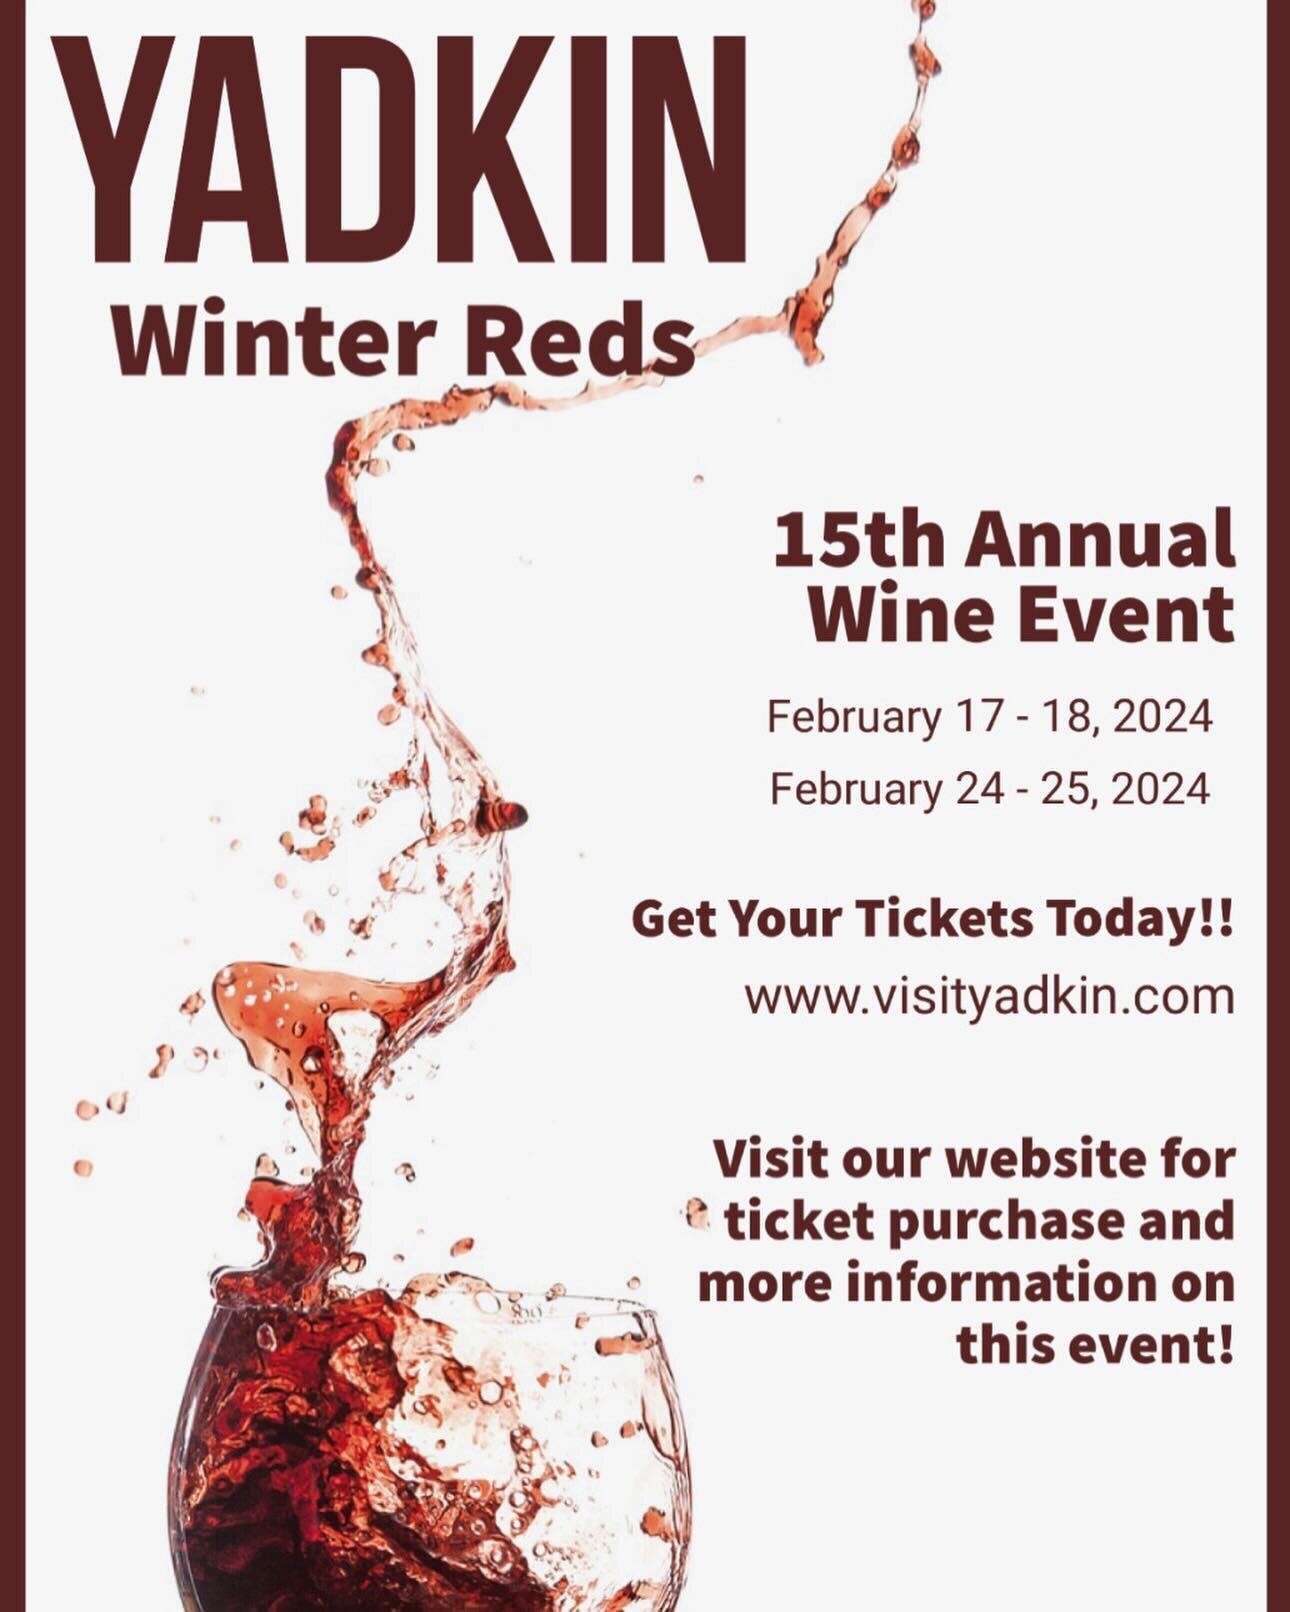 Tickets are still available for the 15th annual Yadkin Winter Reds event! This food and wine pairing event is a great way to experience the many different wineries in our region 🗺️

#visitnc 
#ncwine 
#yadkinvalley